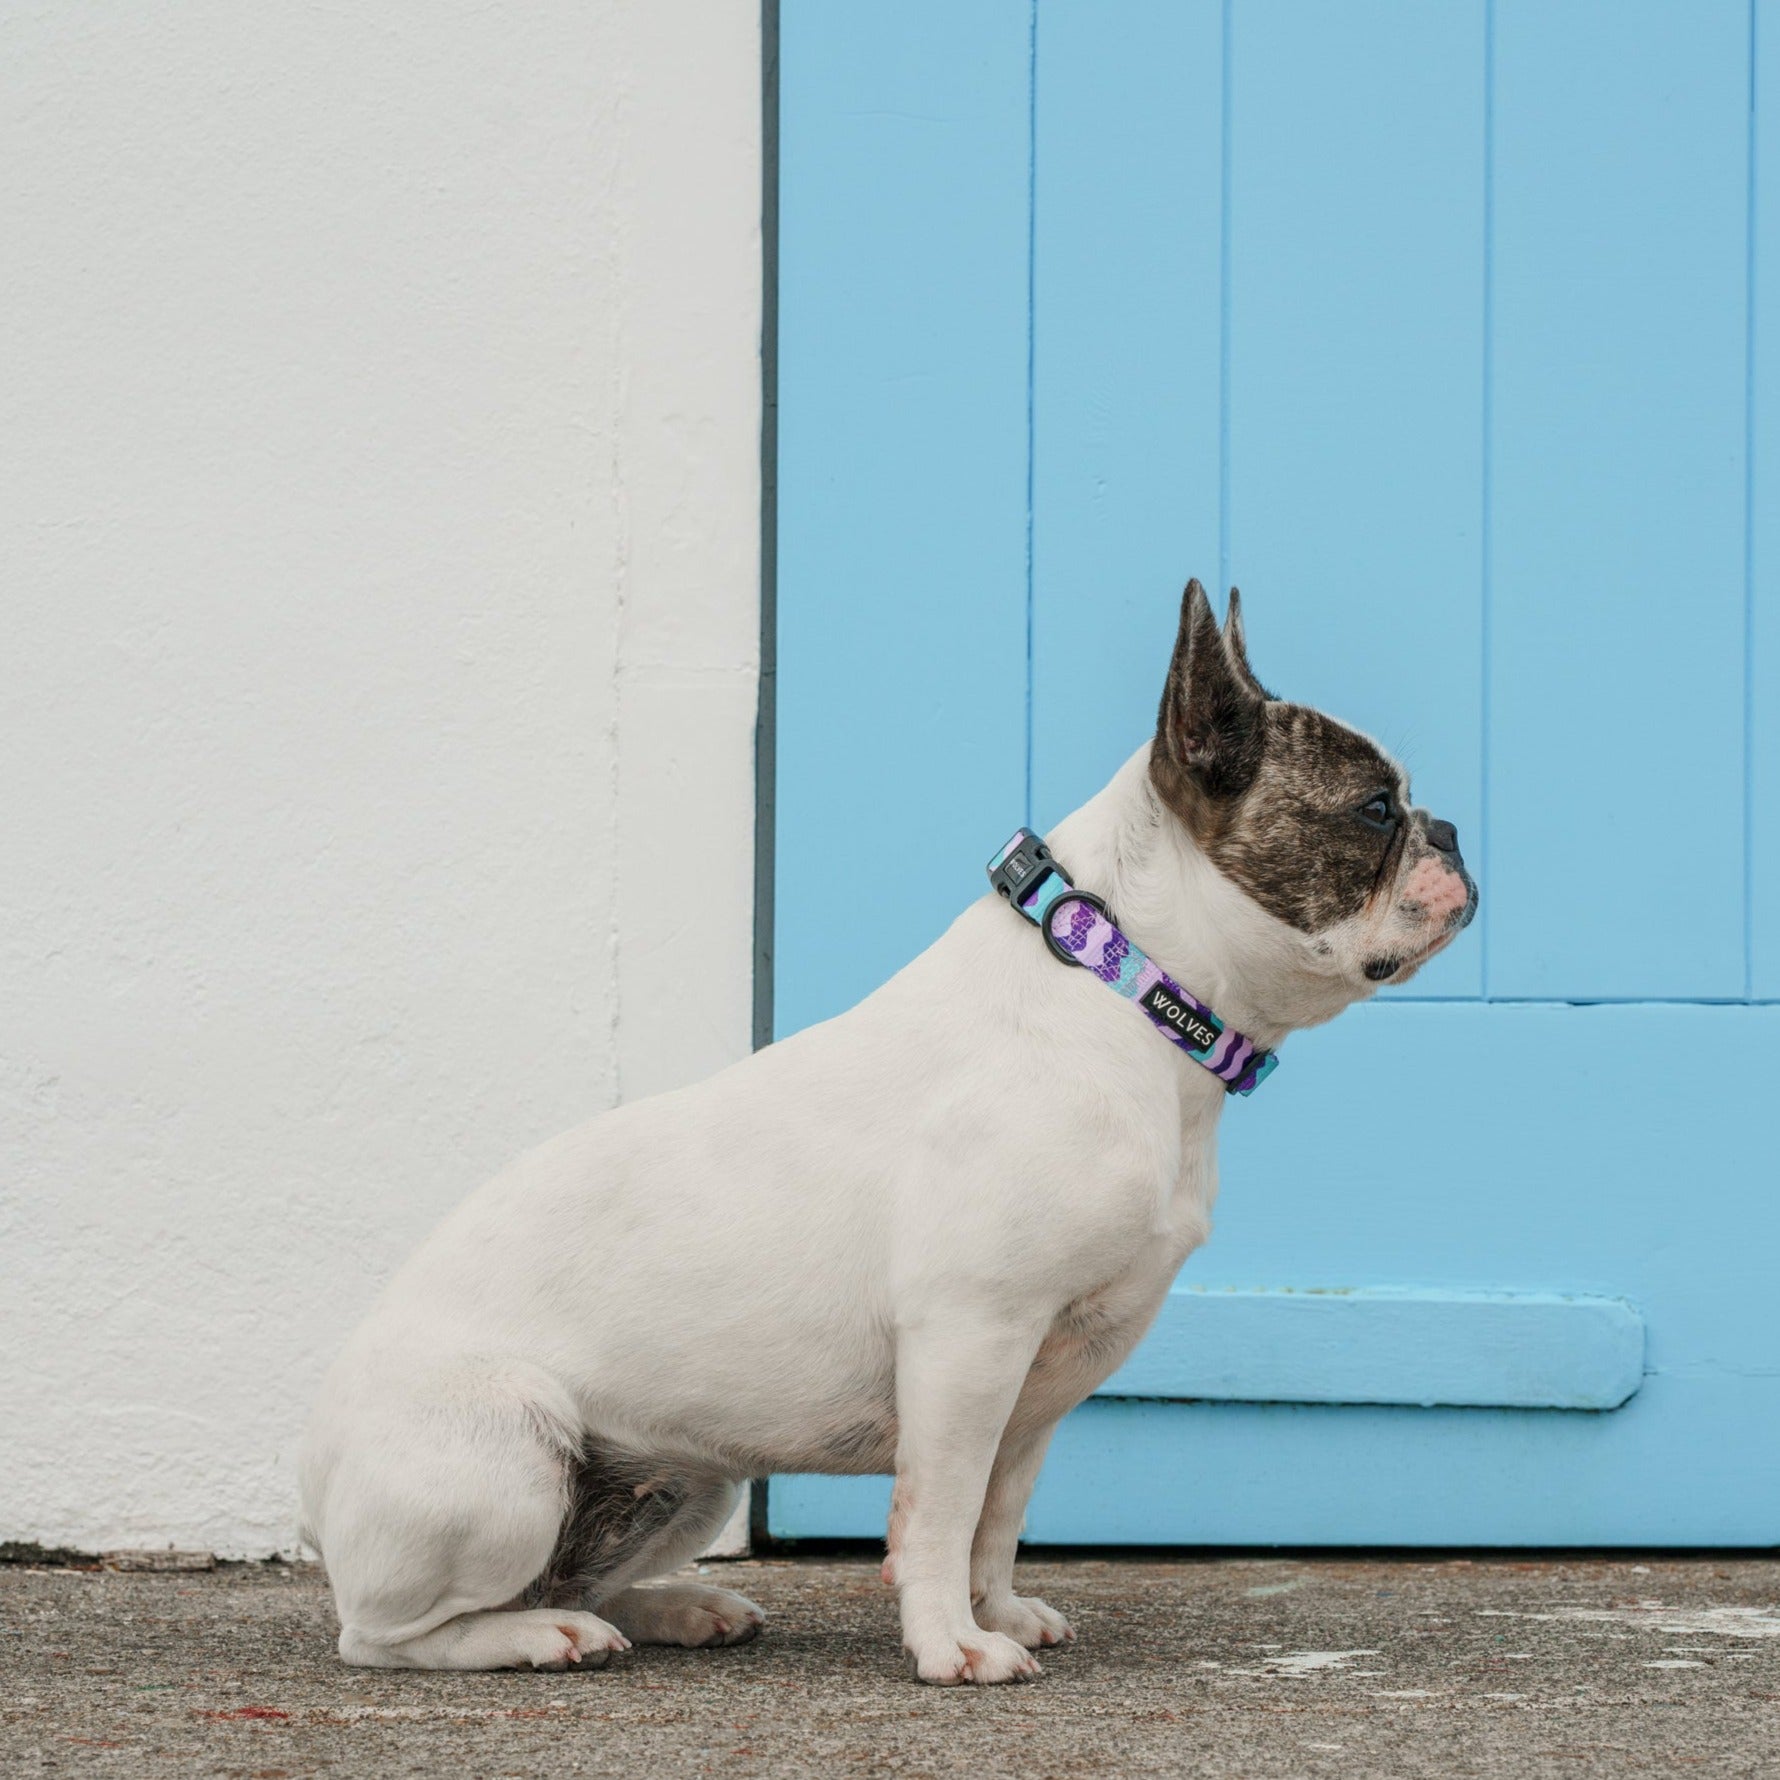 Dog wearing a Purple & blue wave patterned dog collar with "Wolves" logo sitting in front of a blue and white door.